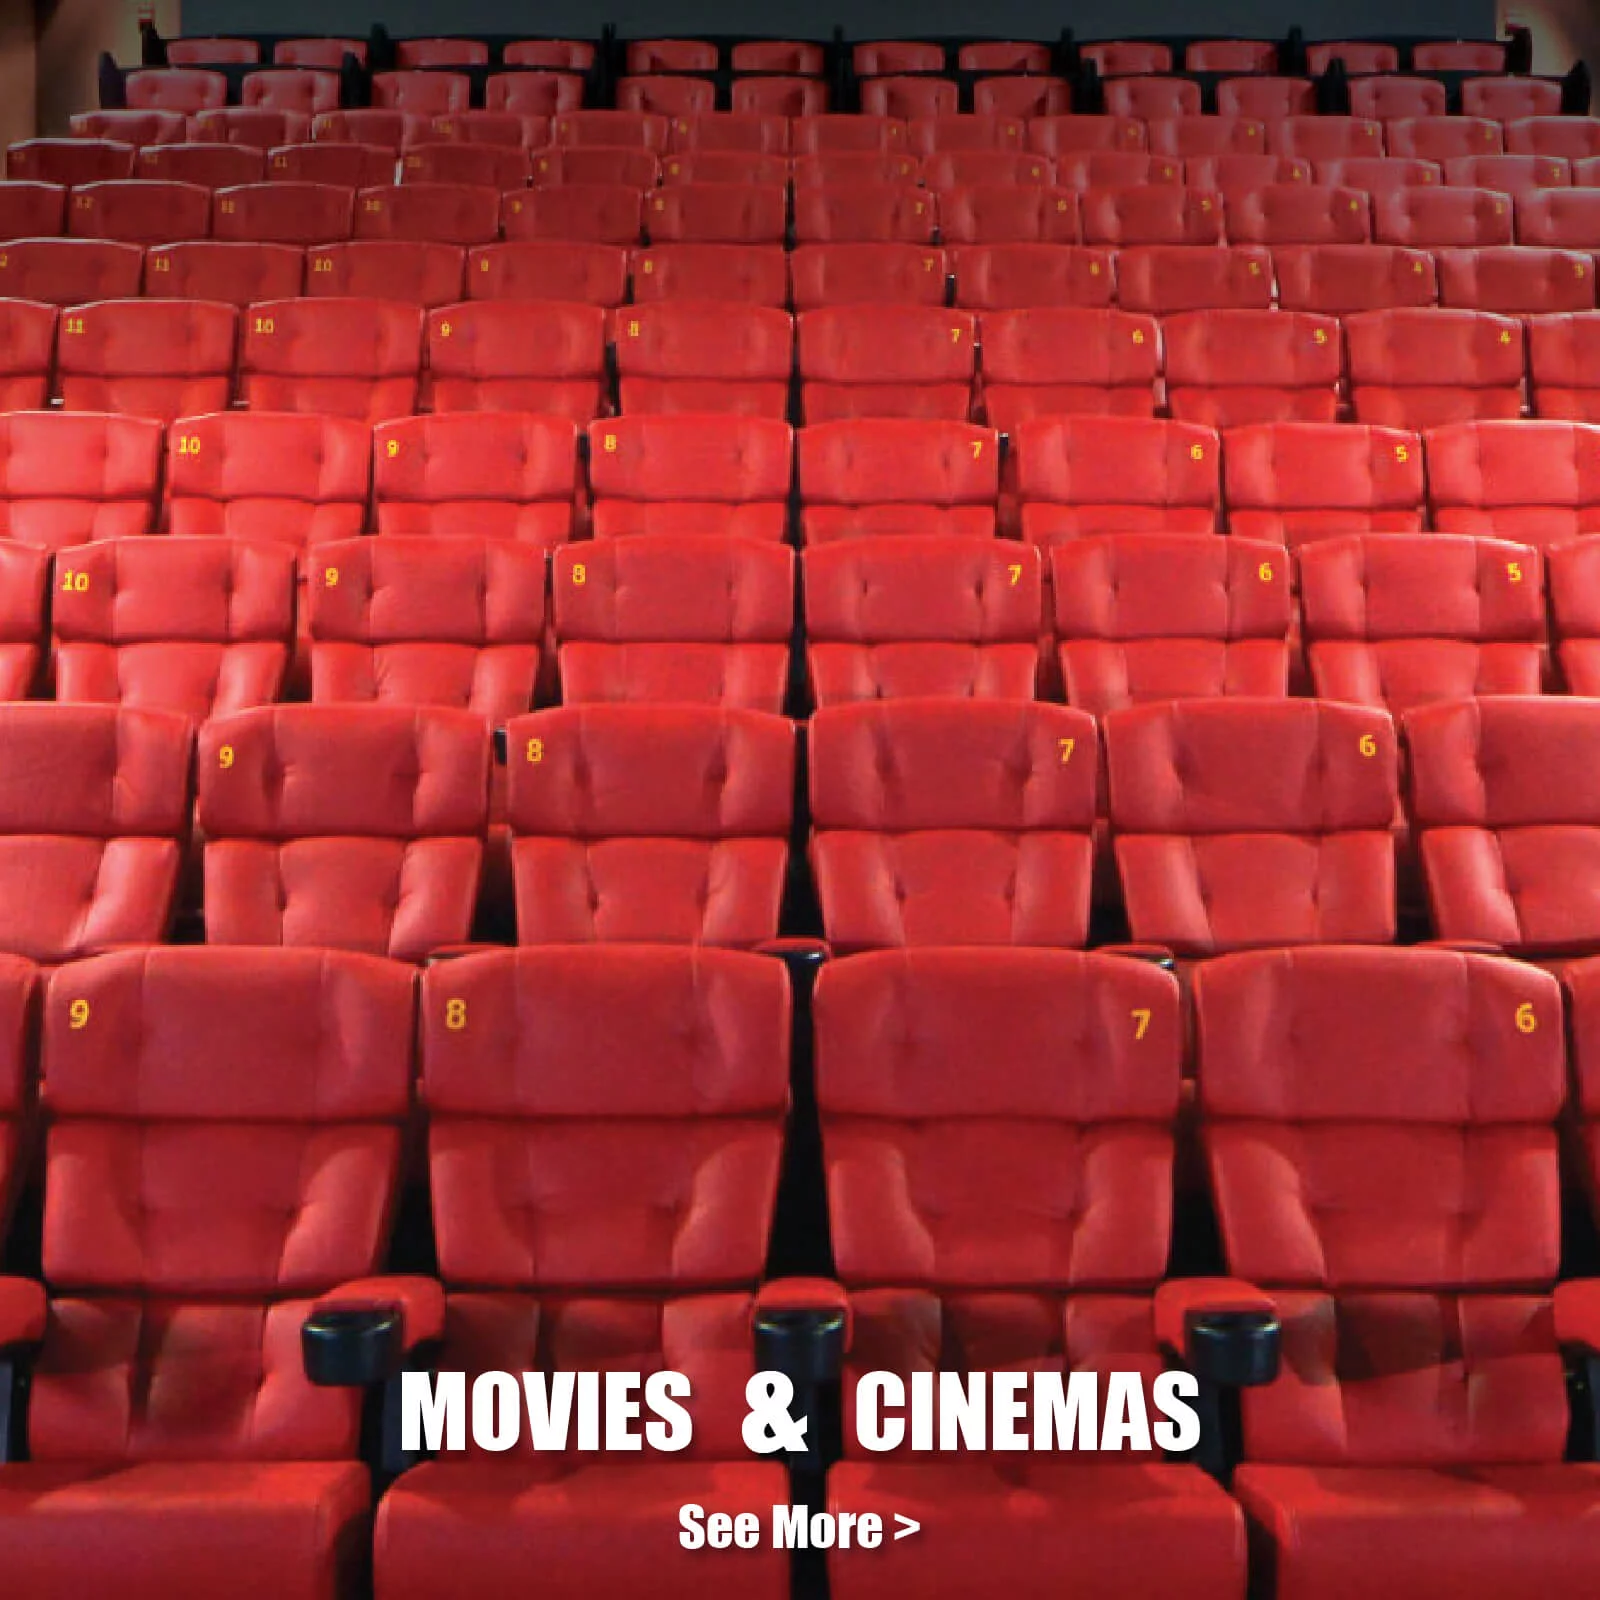 Movies and Cinemas Image - Our Businesses Section - Homepage